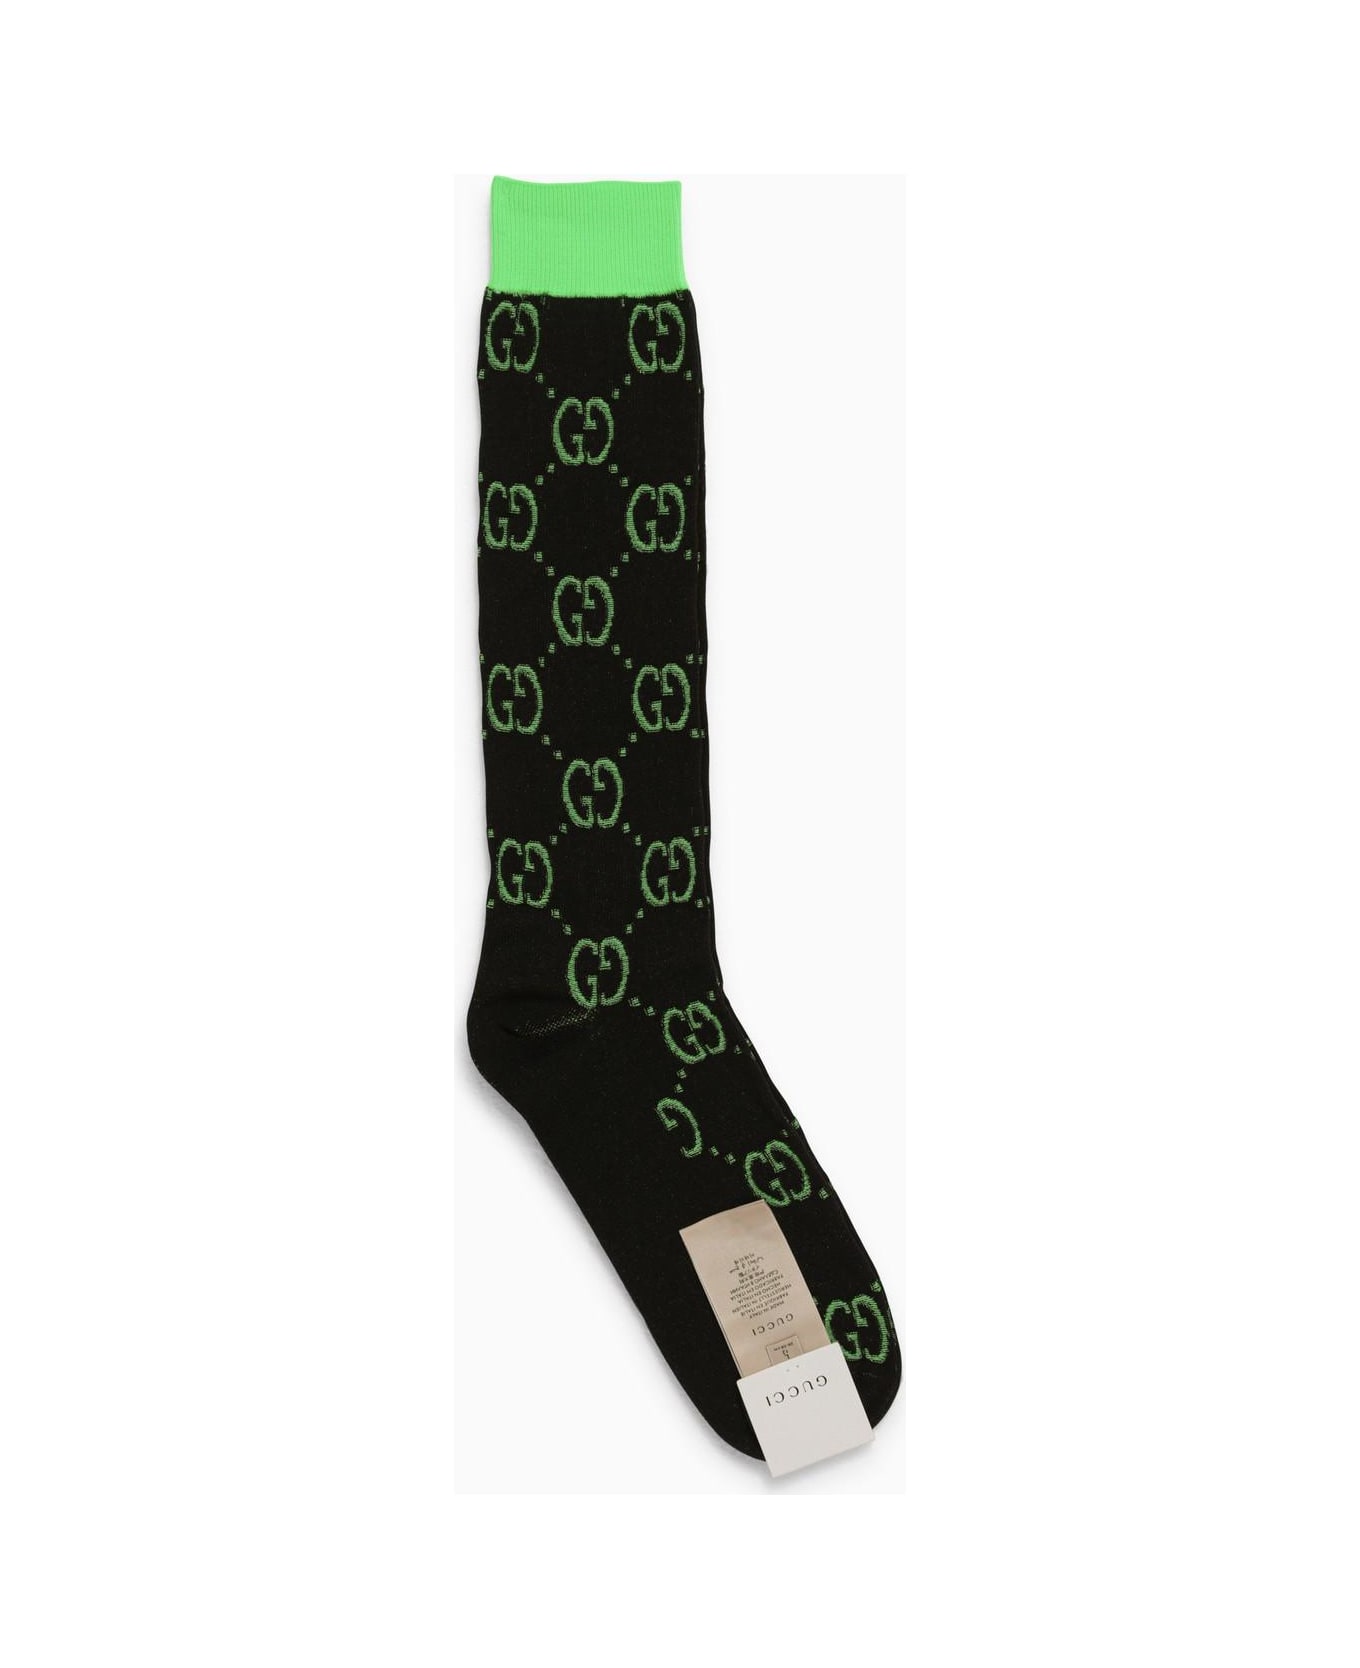 Gucci Black And Green Socks With Gg Motif - Green